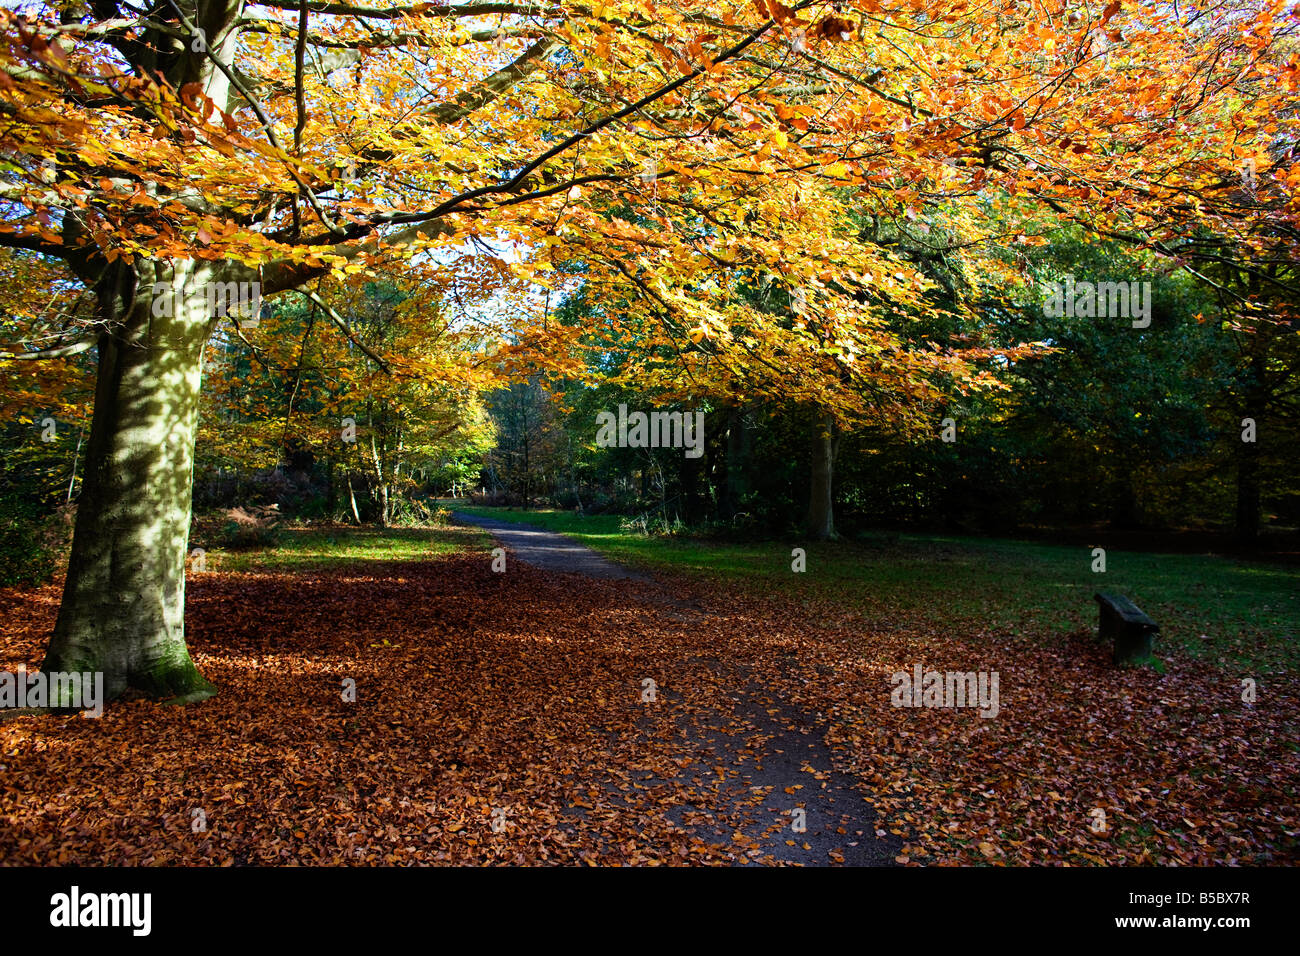 Autumn at the City of London owned Burnham Beeches in Buckinghamshire. Fallen leaves cover a small road through the wood Stock Photo